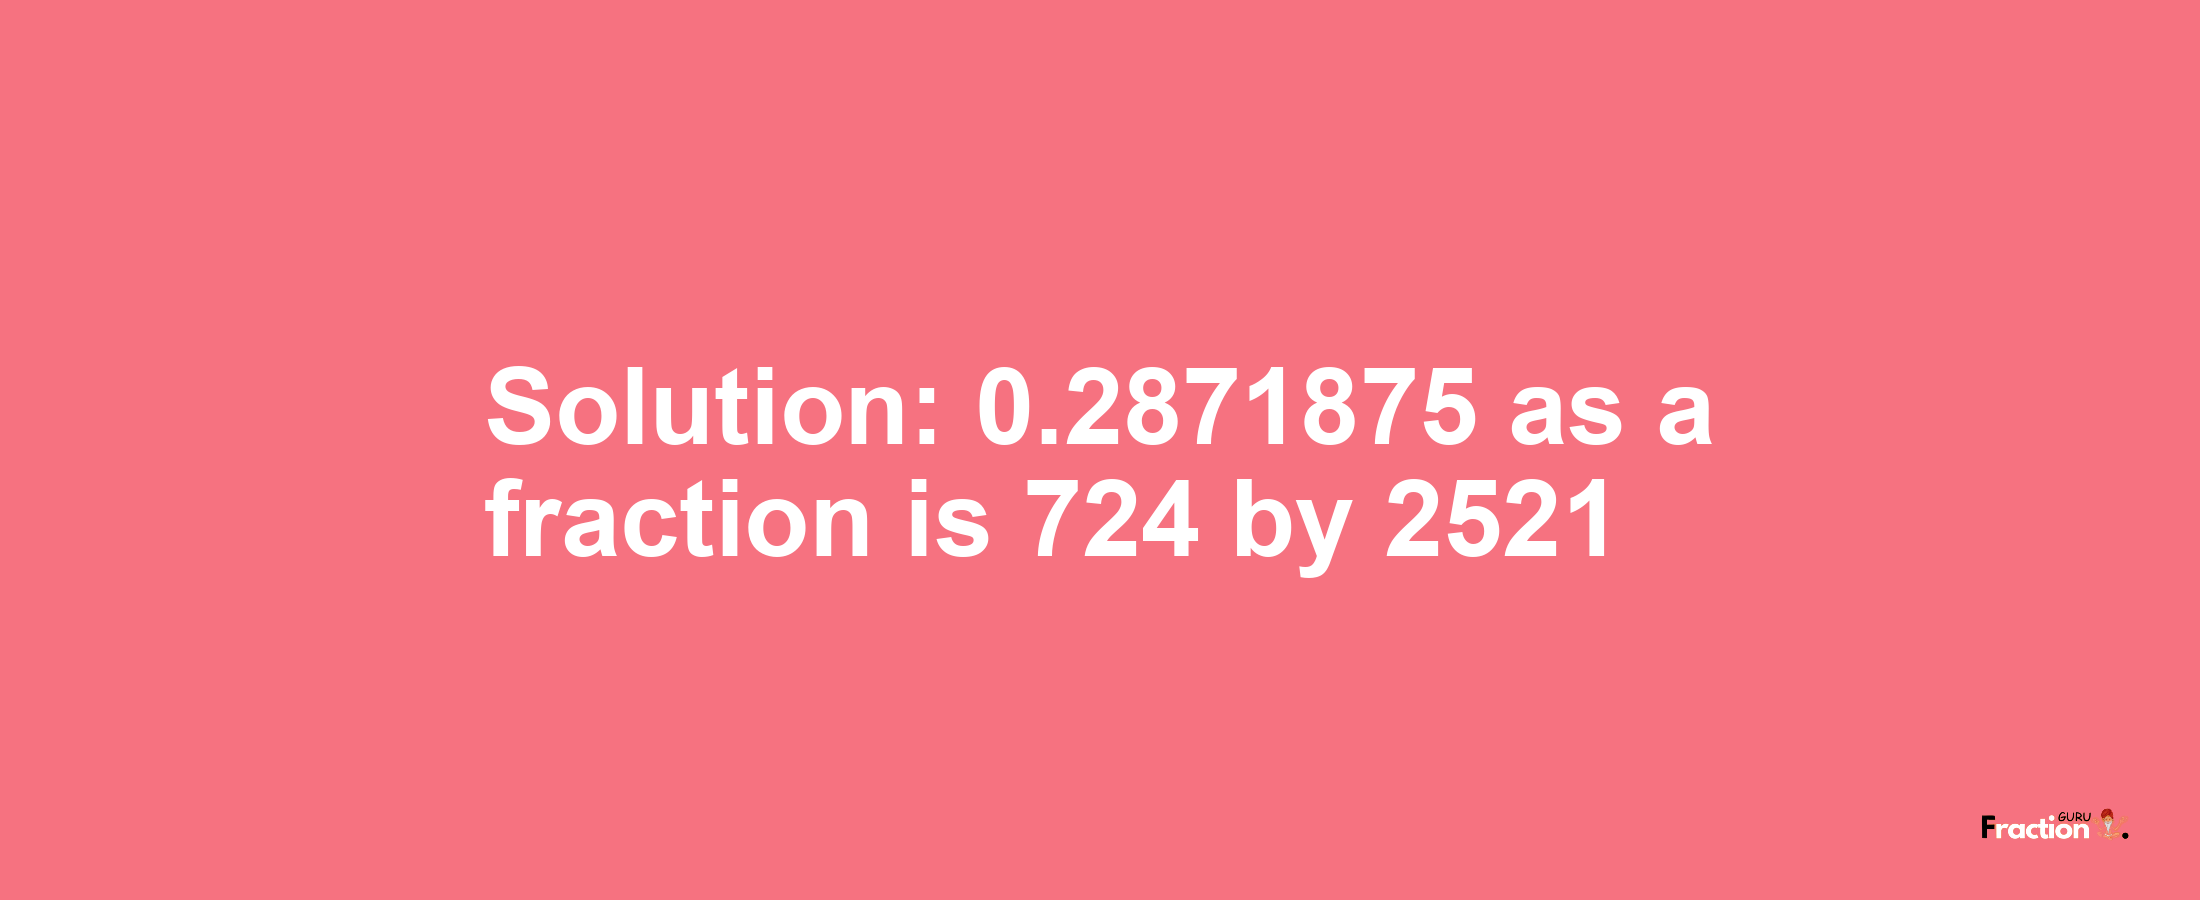 Solution:0.2871875 as a fraction is 724/2521